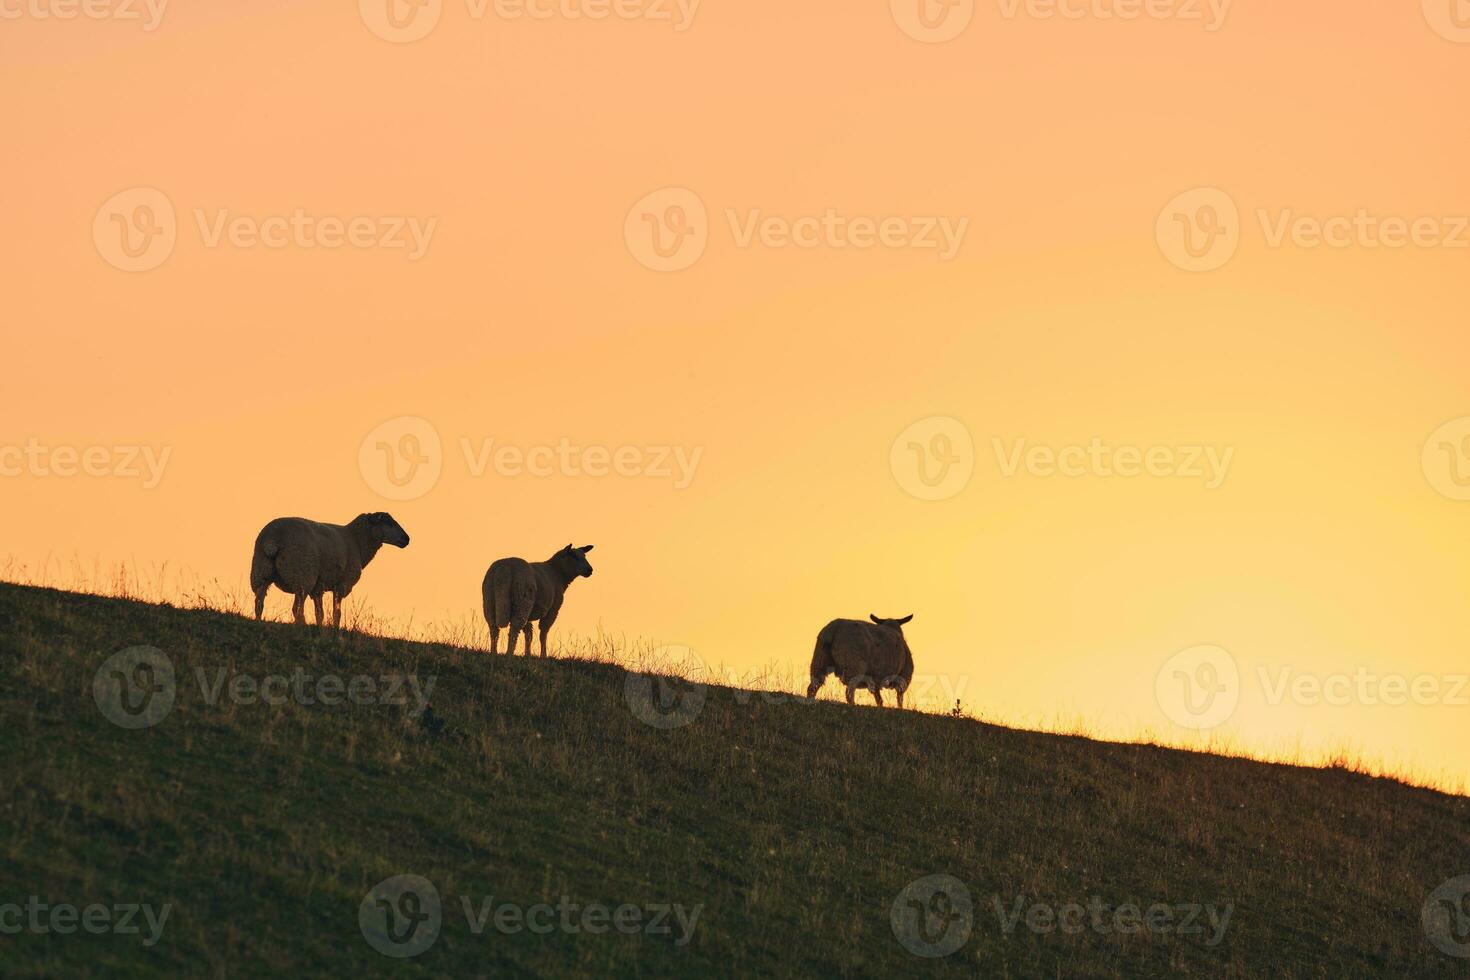 Sheep standing on dyke in sunset photo